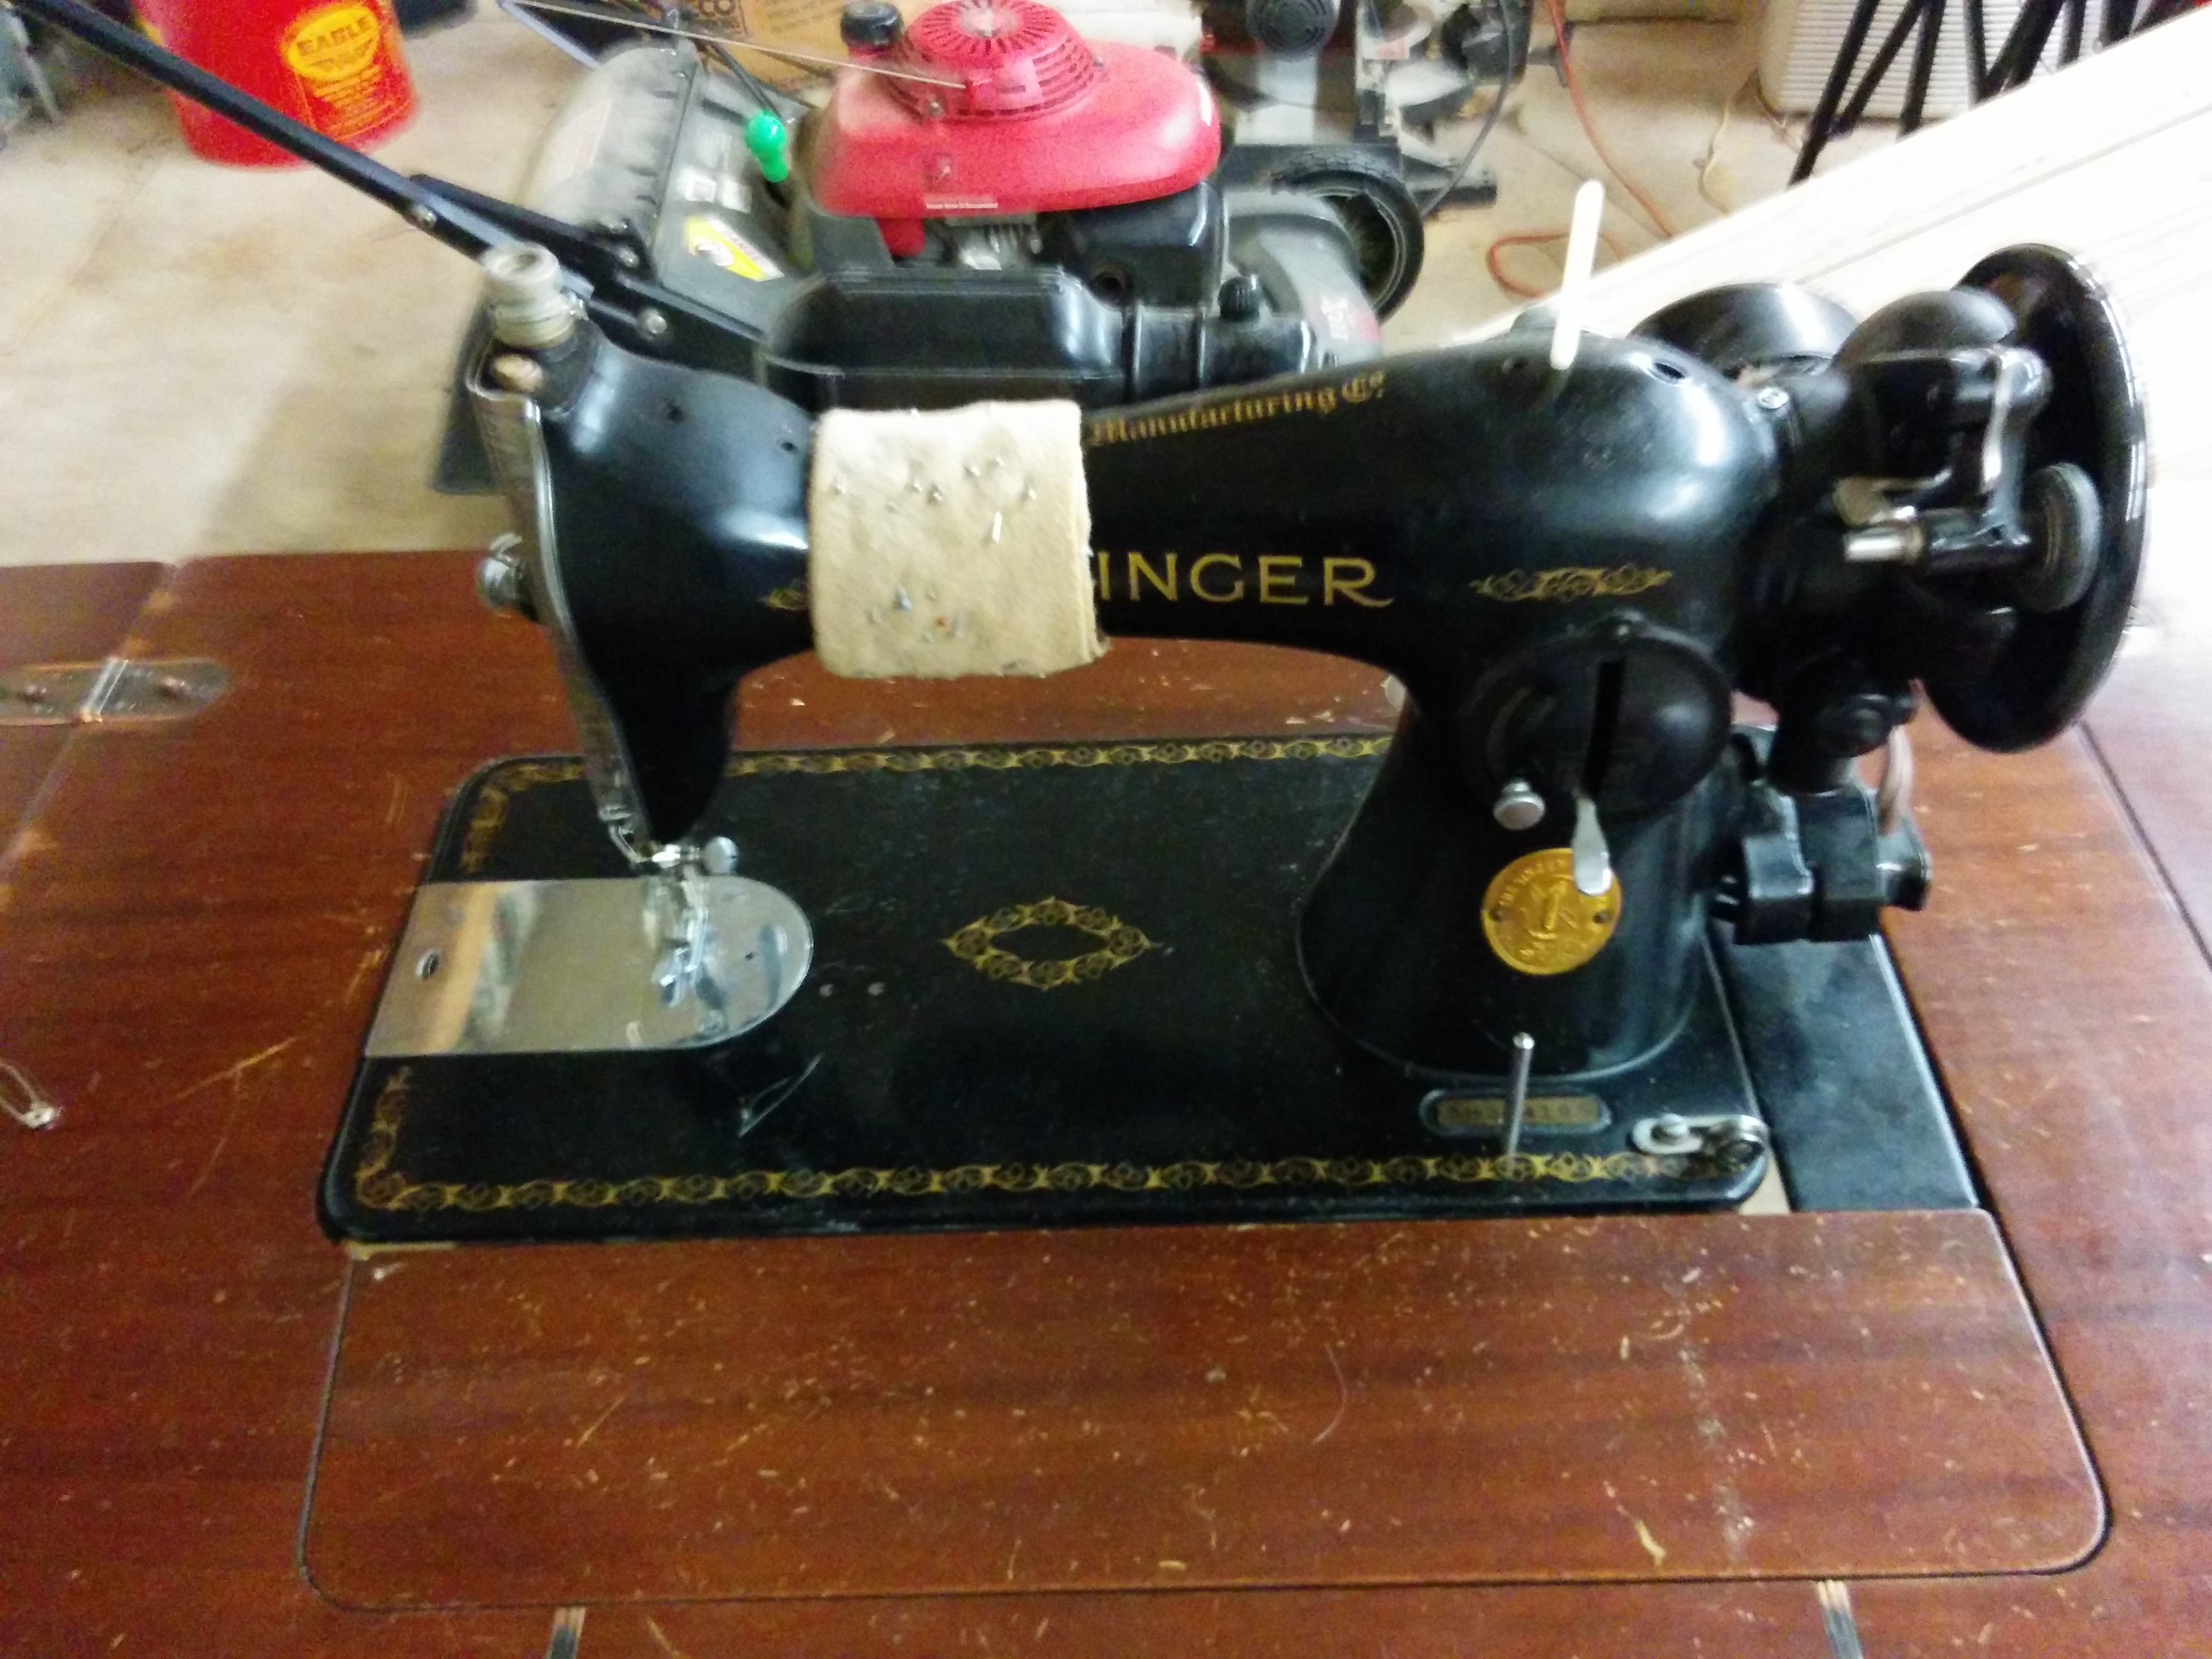 Singer 4411 Heavy duty - Tension issue? sewing discussion topic @  PatternReview.com